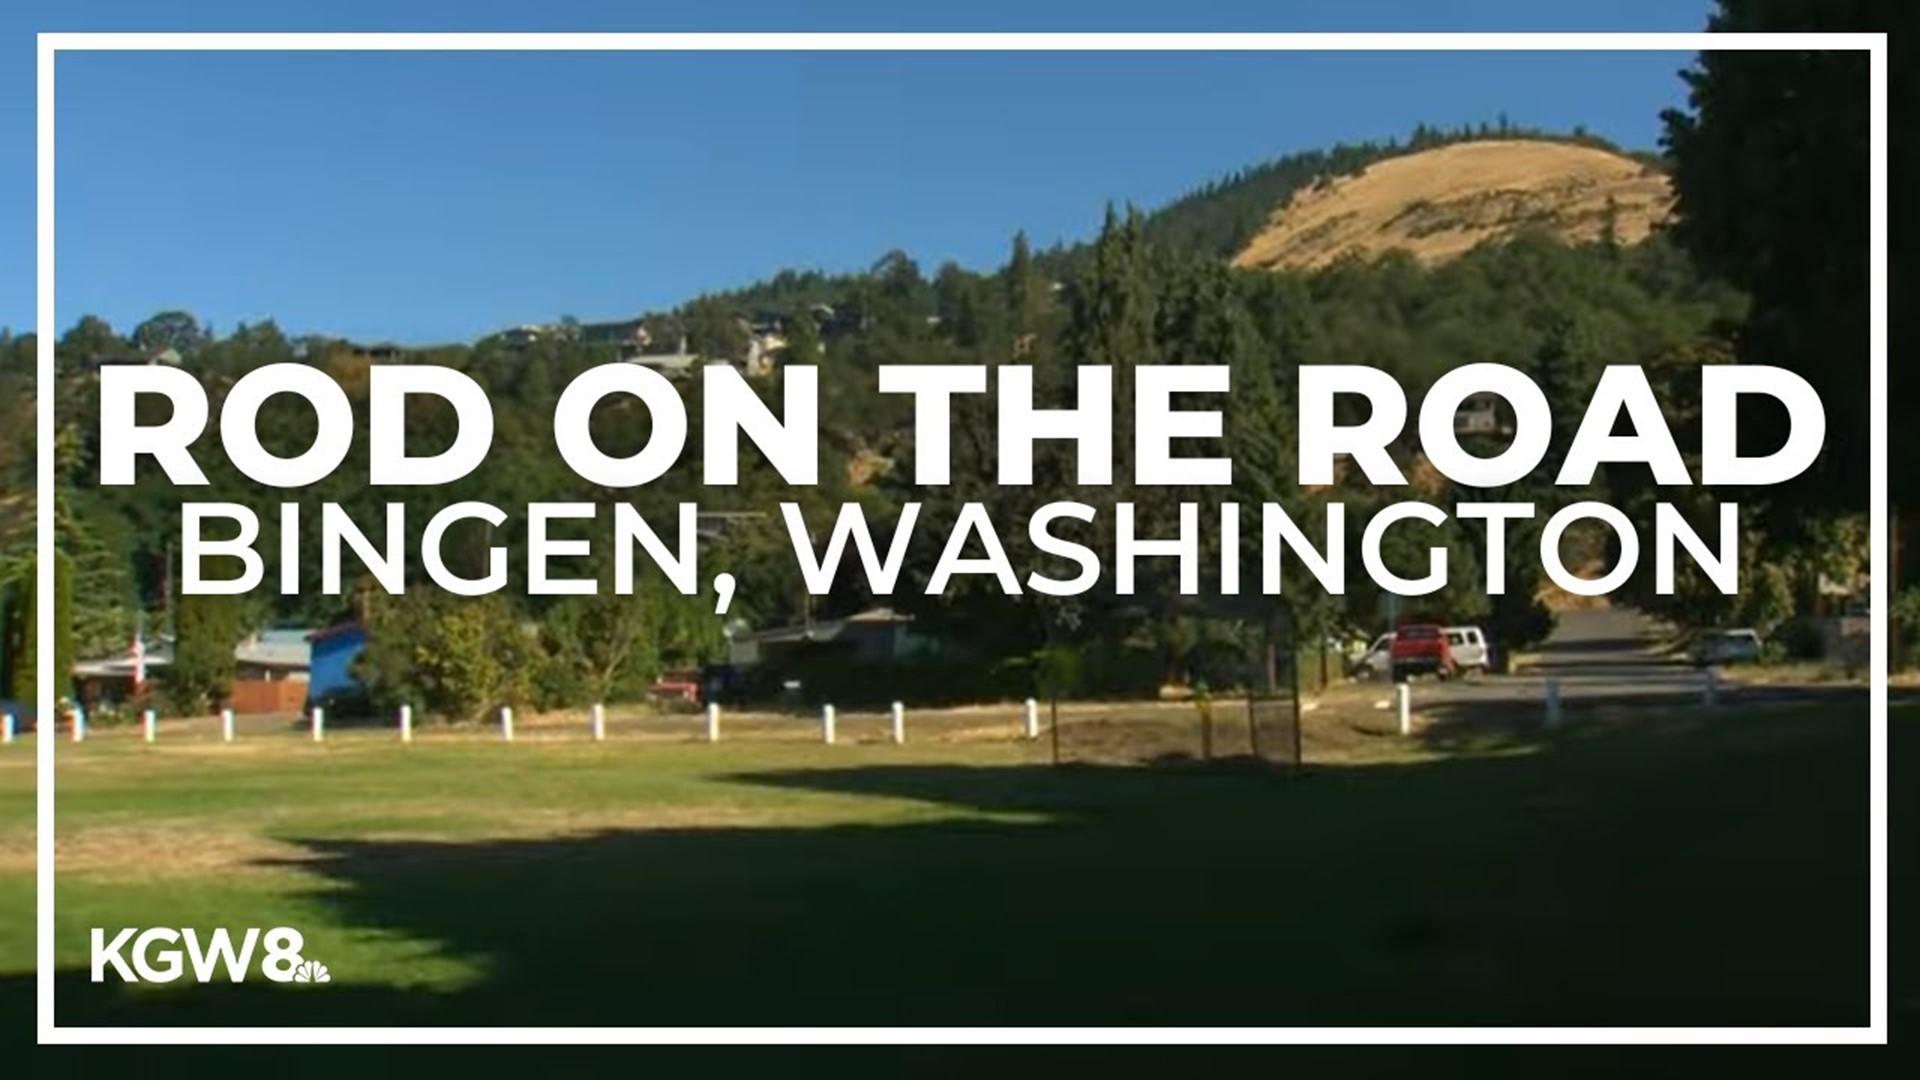 The Huckleberry Festival runs draws people from all over the region each year to the small town of Bingen on the Washington side of the Columbia River Gorge.